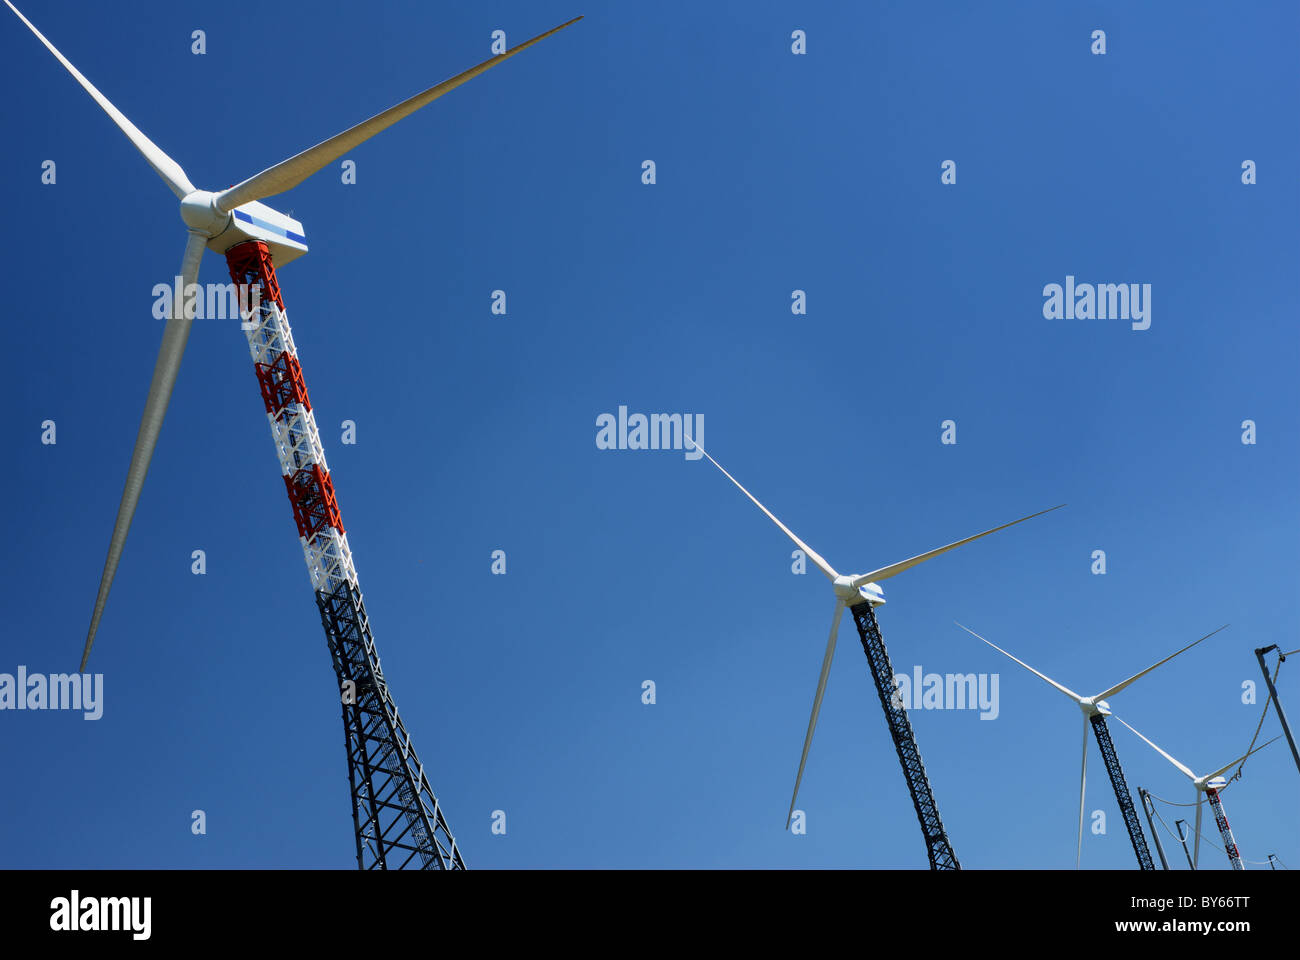 Row of windmills in blue sky Stock Photo